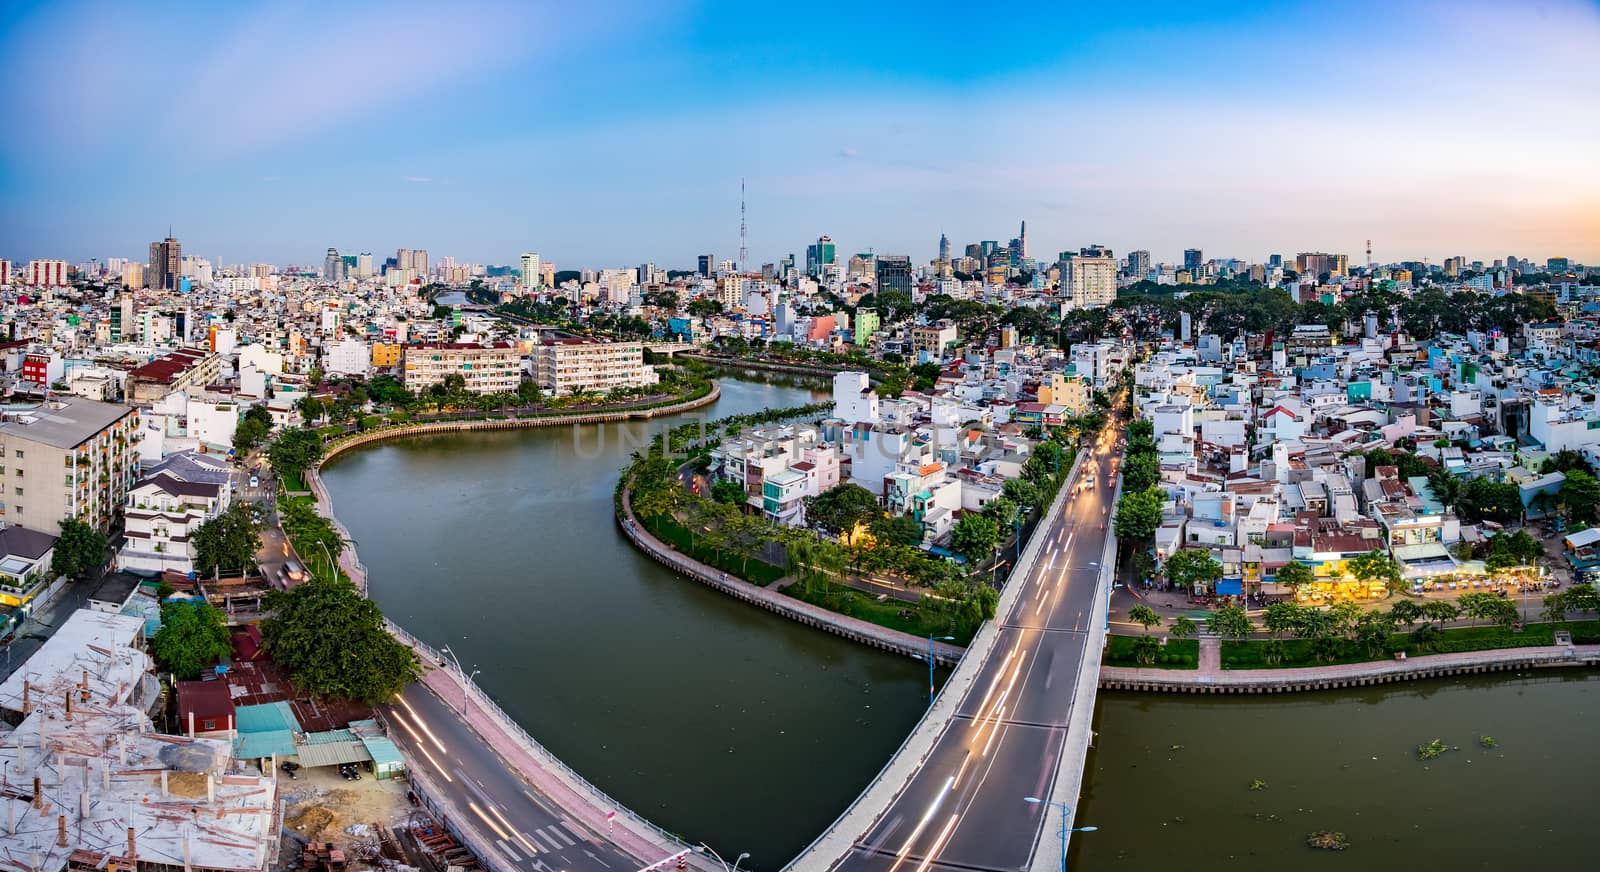 Aerial sunshine view of rooftop skyscraper on Nhieu Loc canal in Ho Chi Minh city, Vietnam